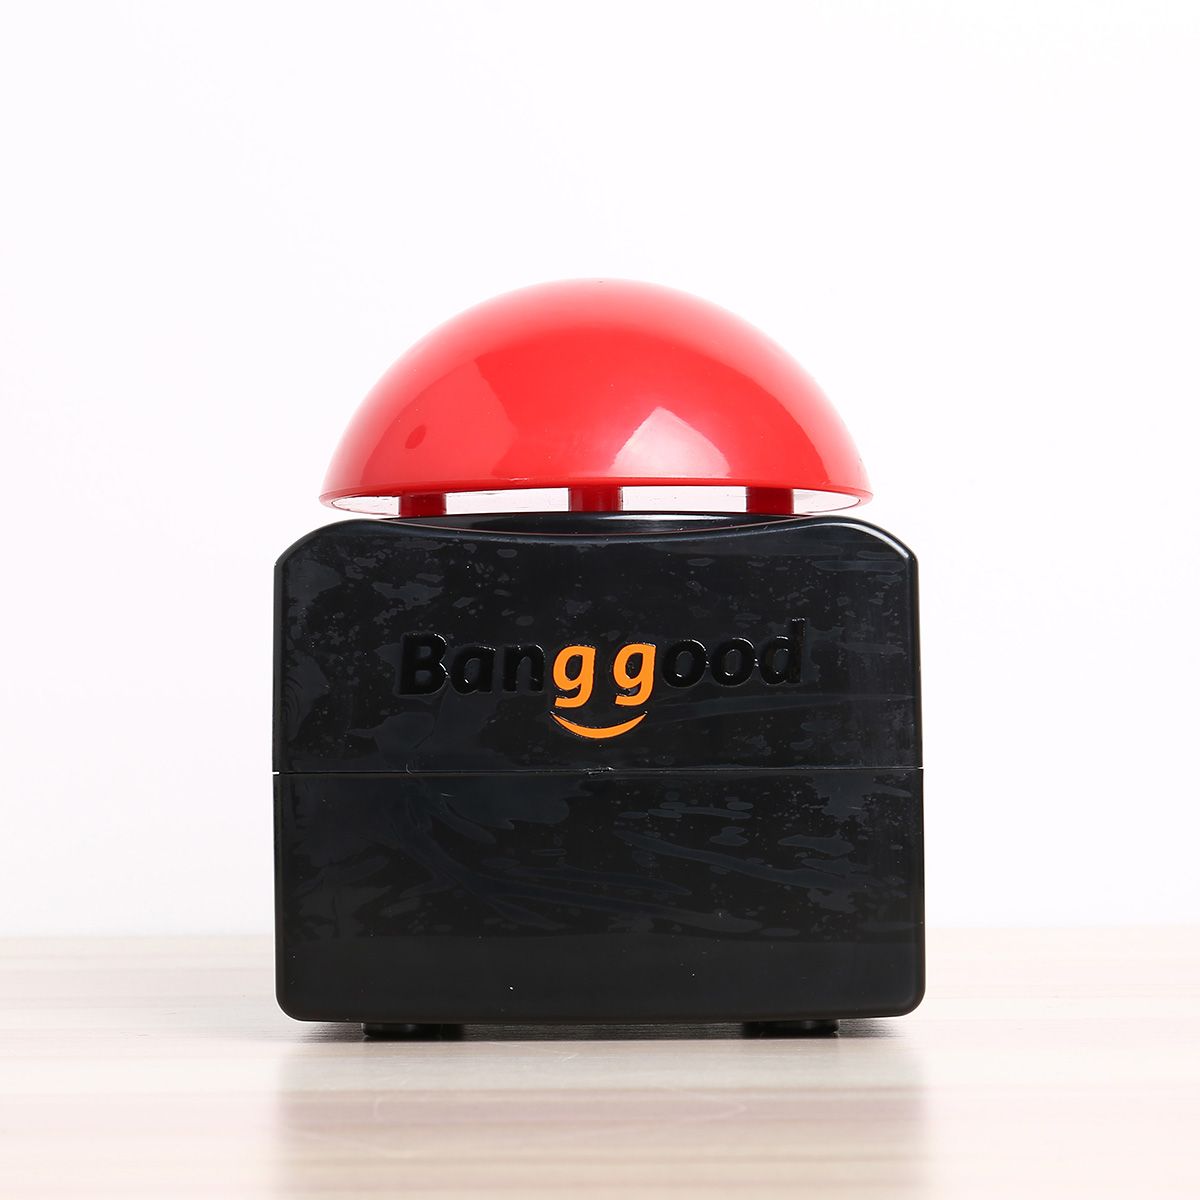 Bang-good-Buzzer-Alarm-Push-Button-Lottery-Trivia-Quiz-Game-Red-Light-With-Sound-And-Light-1318897